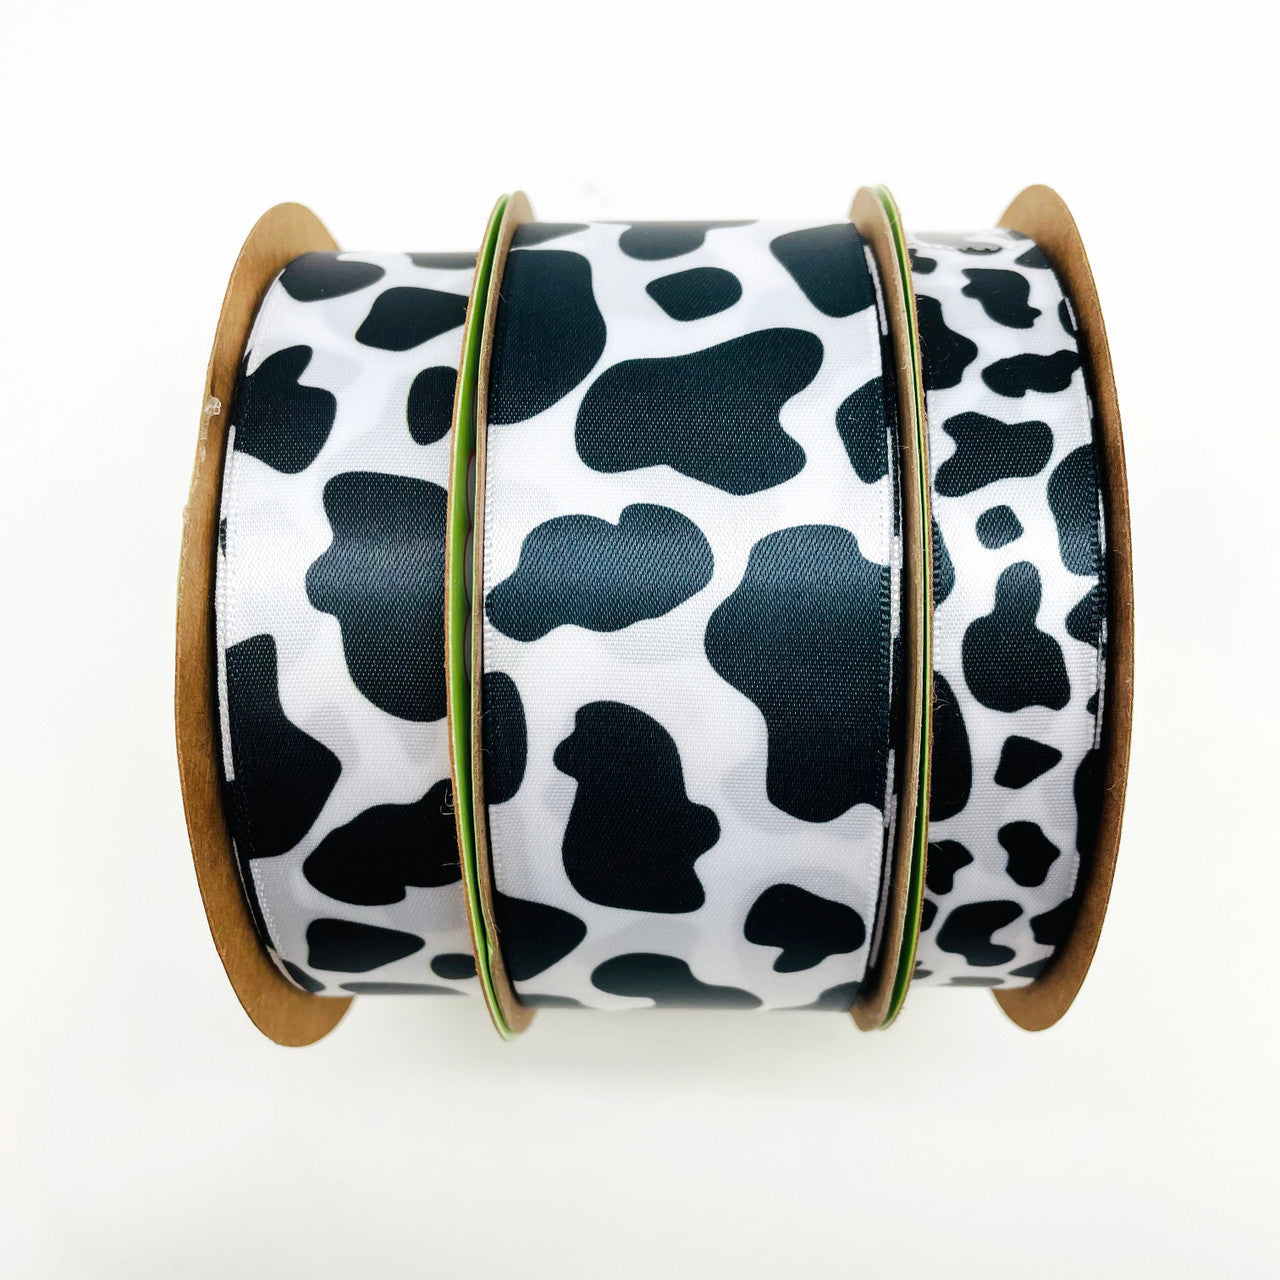 Our cow print ribbon is available in 5/8", 7/8" and 1.5" widths for all your crafting needs from gift wrapping, to wreath making and party favors